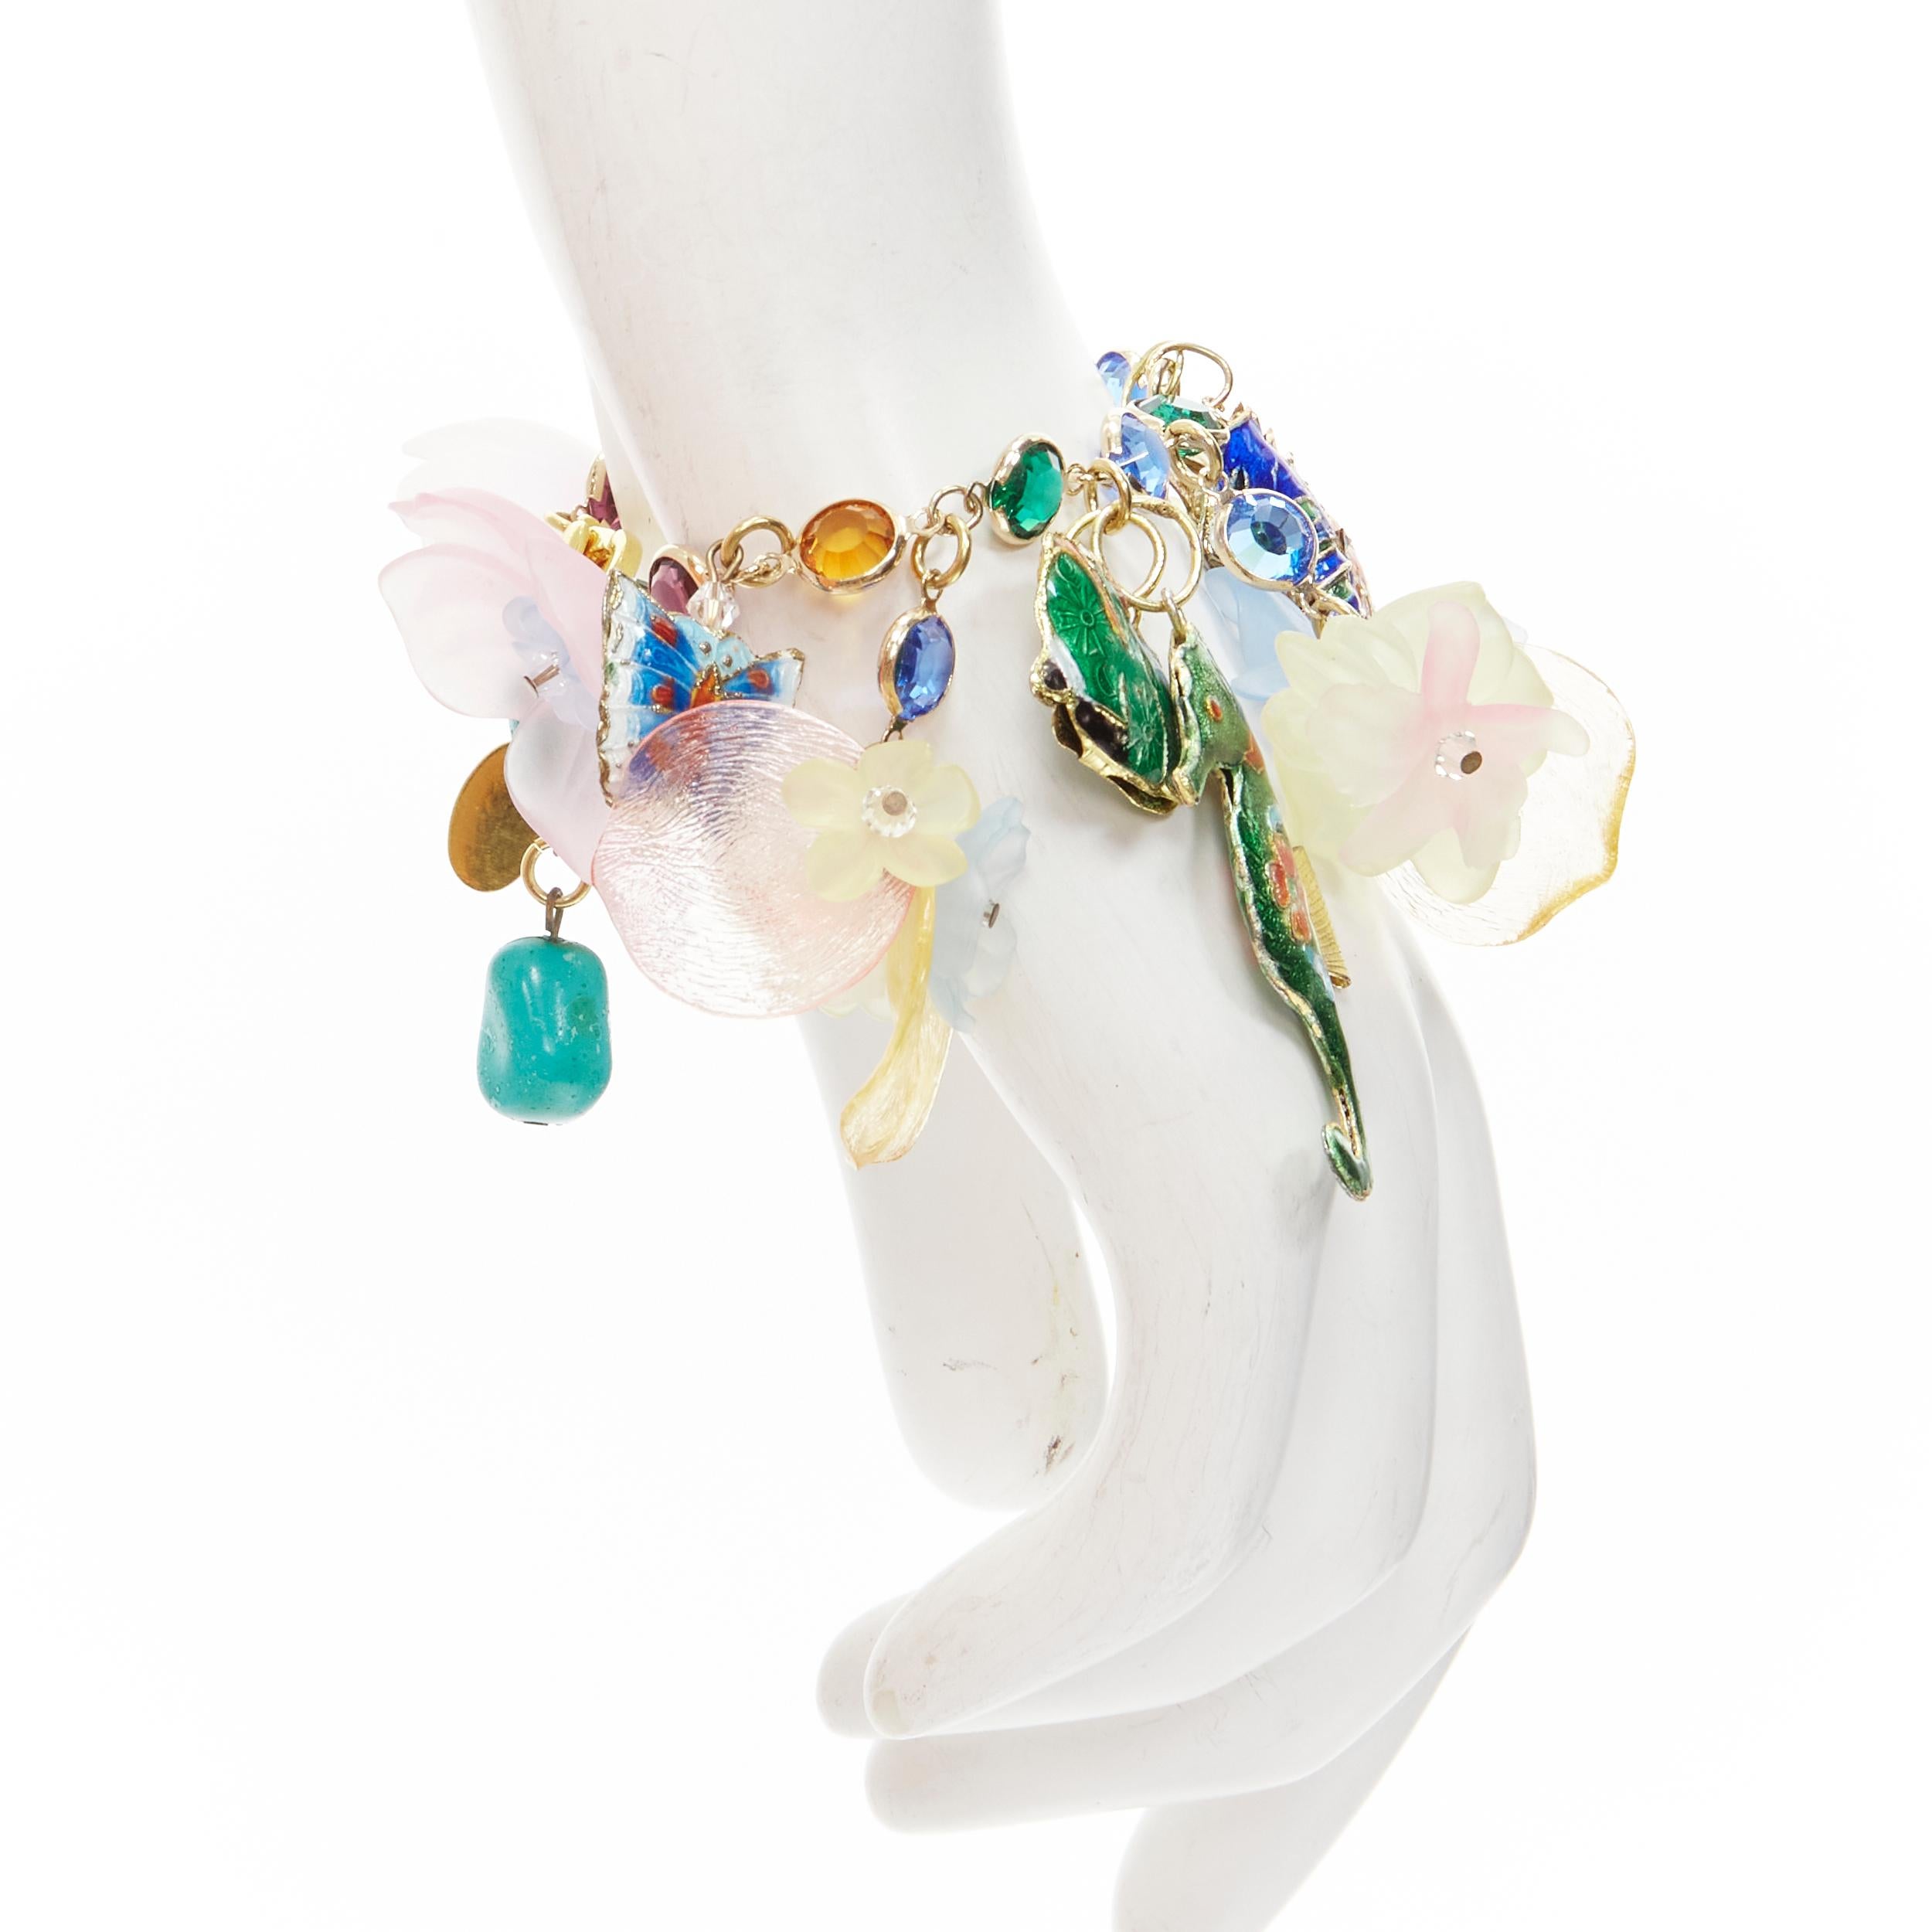 ERICKSON BEAMON colorful flower sea creatures crystal acrylic bracelet
Reference: ANWU/A00284
Brand: Erickson Beamon
Material: Acrylic, Metal
Color: Multicolour, Gold
Pattern: Animal Print
Closure: Lobster Clasp
Extra Details: Fish, seahorse, turtle